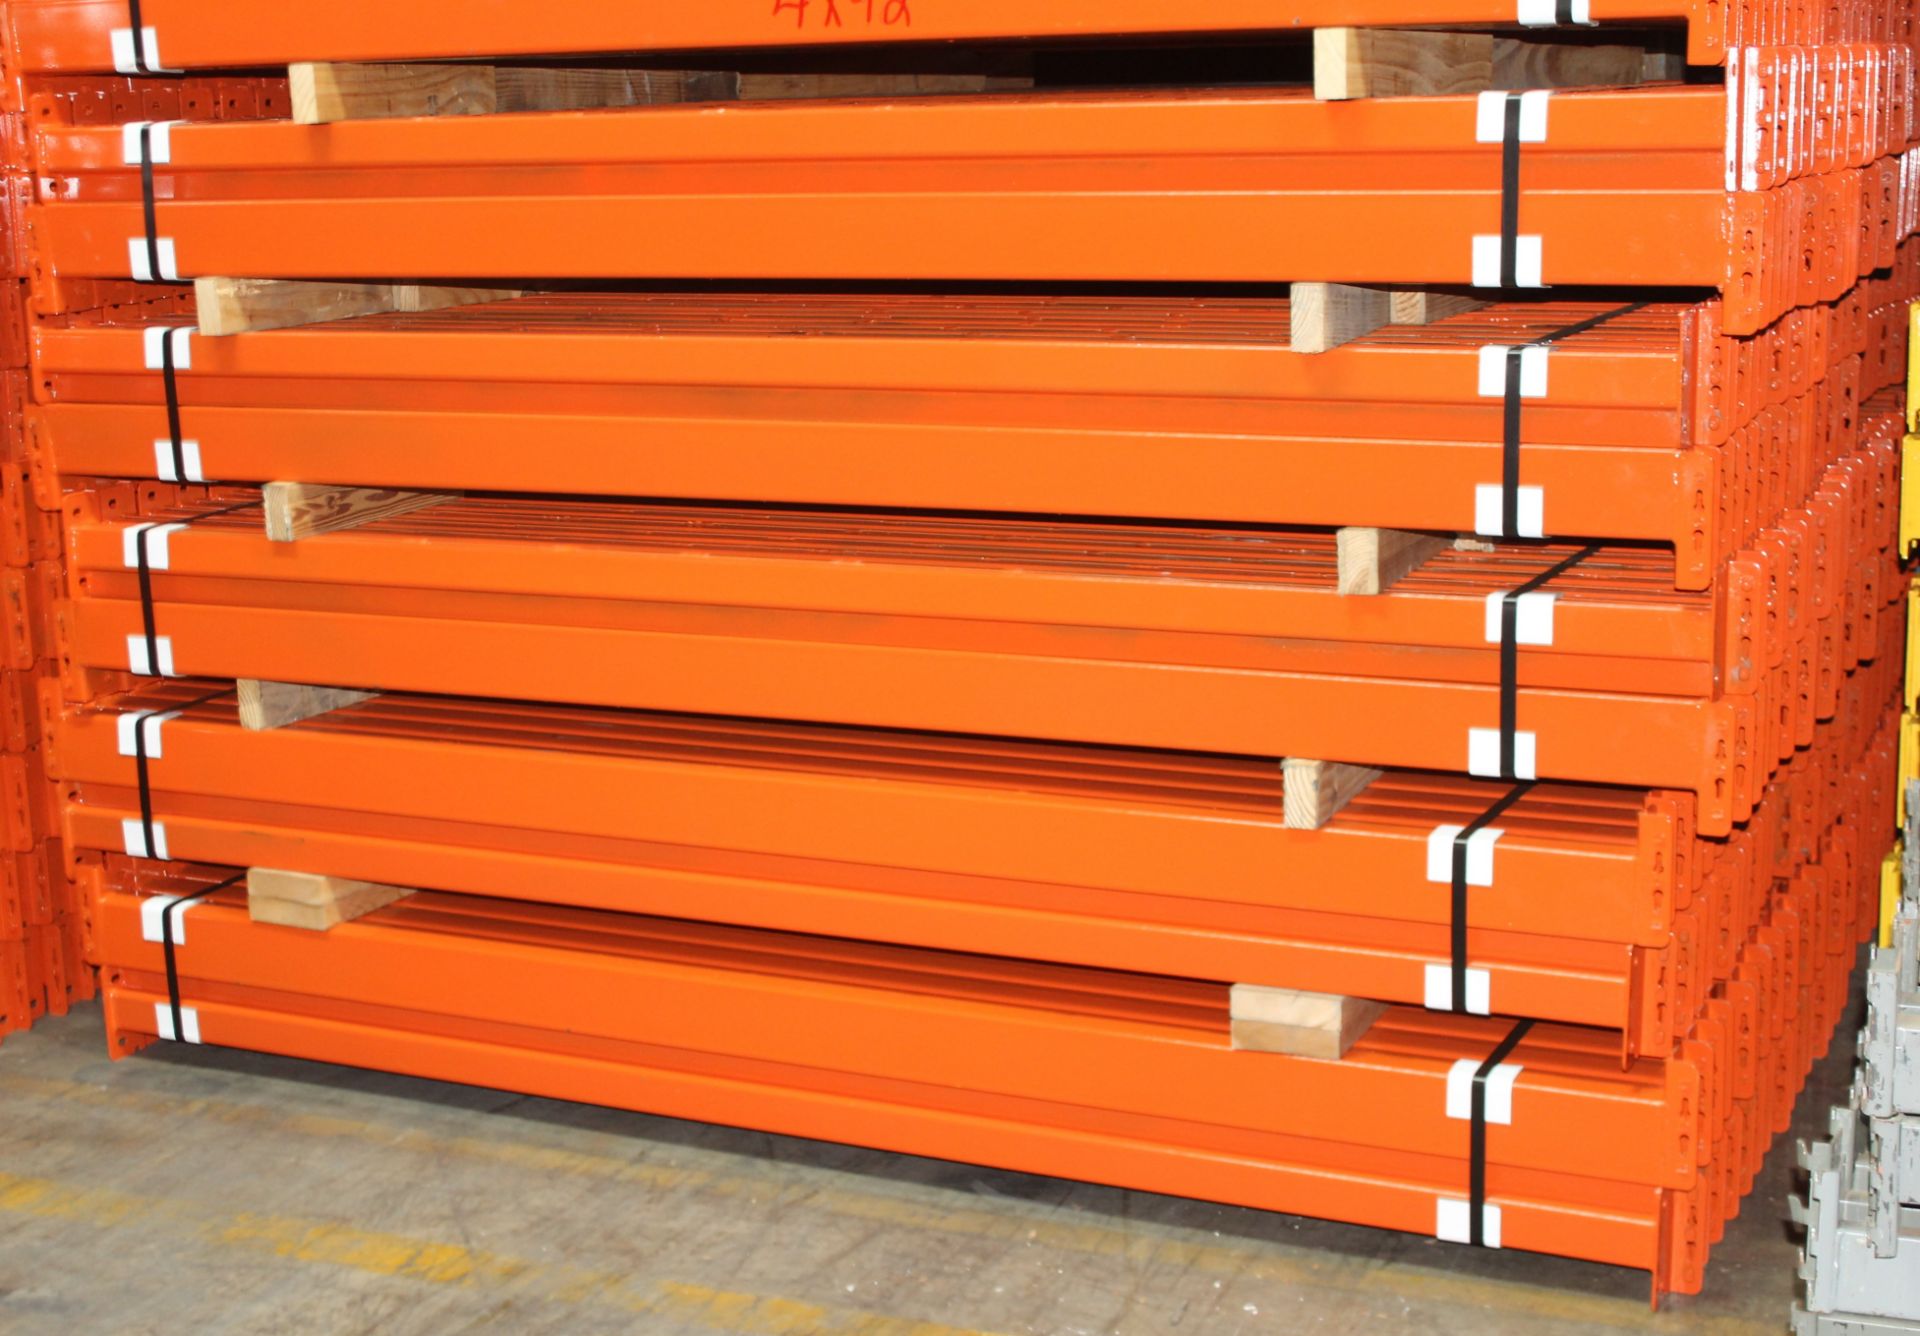 14 BAYS OF TEARDROP STYLE PALLET RACK, LIKE NEW, SIZE: 16'H x 42"D X 8'W - Image 2 of 4